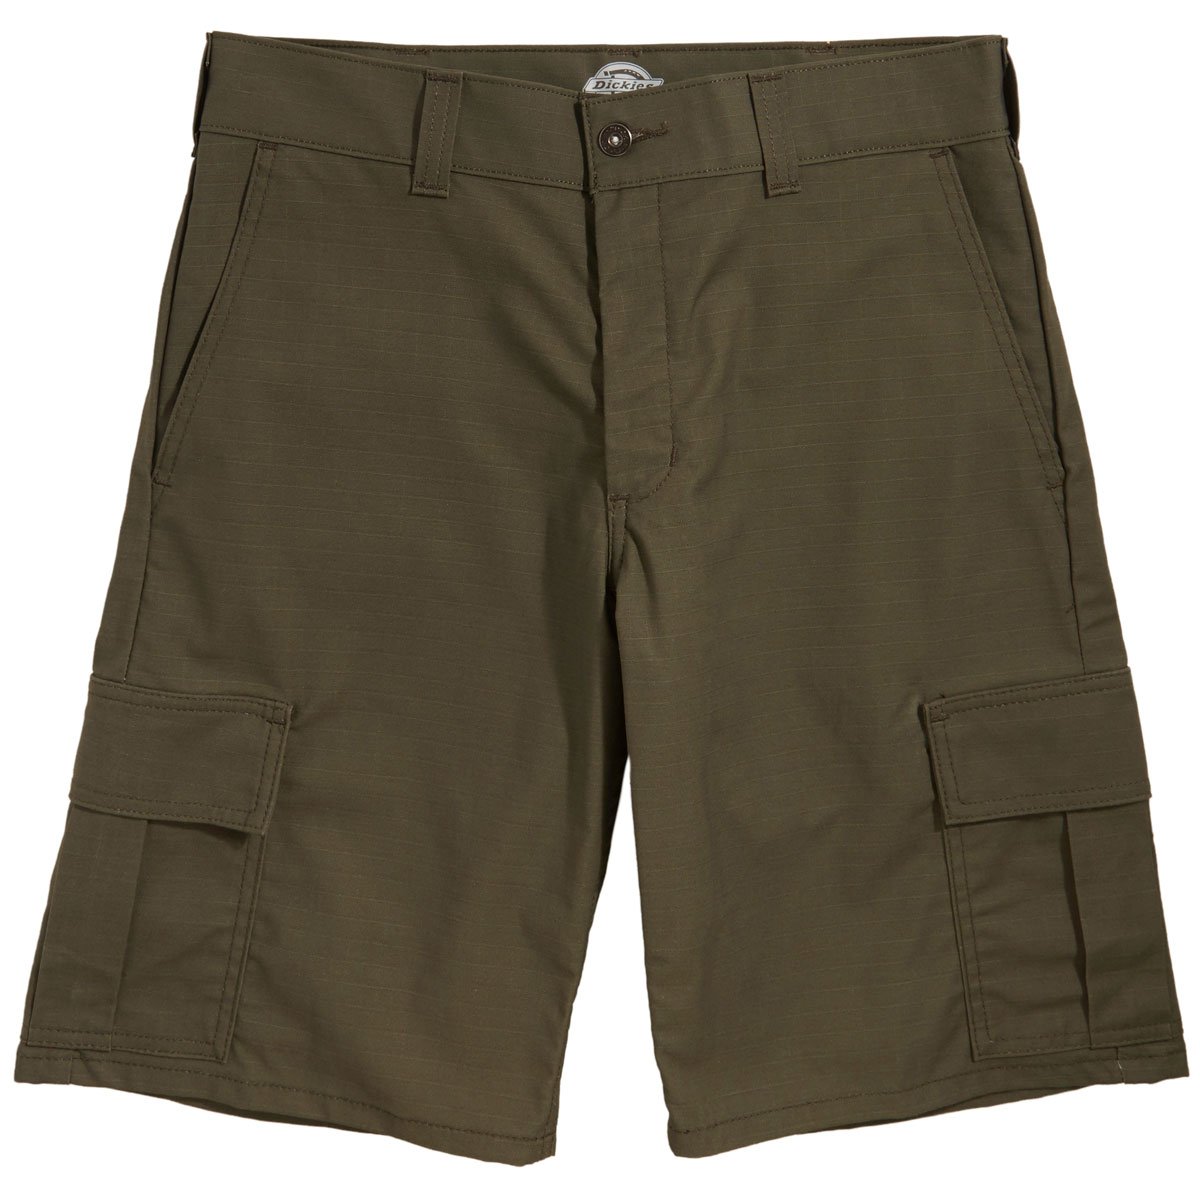 Dickies 67 Collection Cargo Shorts - Moss Green image 1